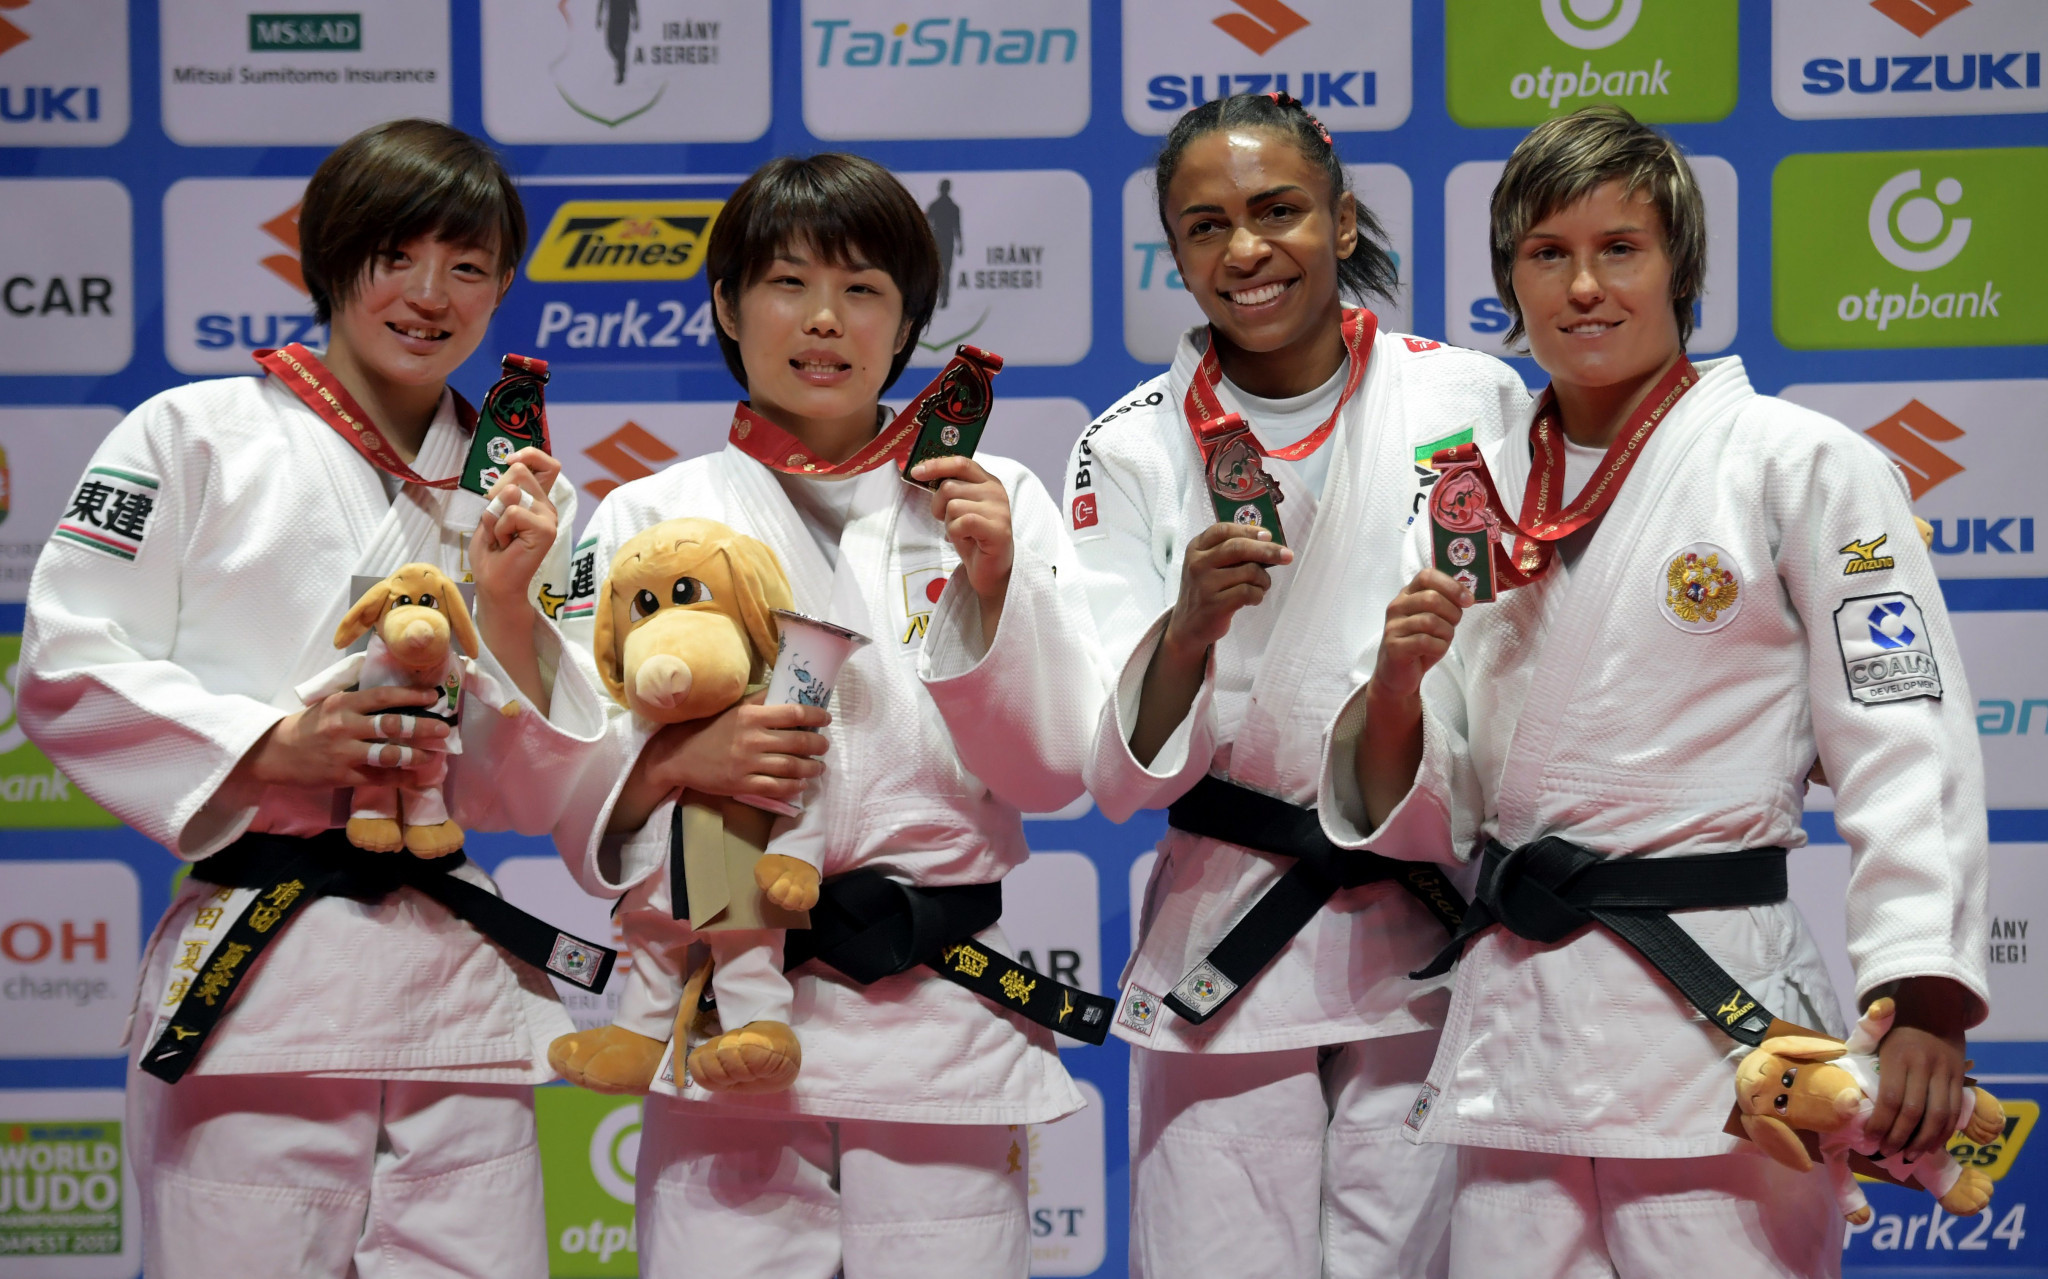 Ai Shishime's victory handed Japan their third consecutive gold medal of the event ©Getty Images